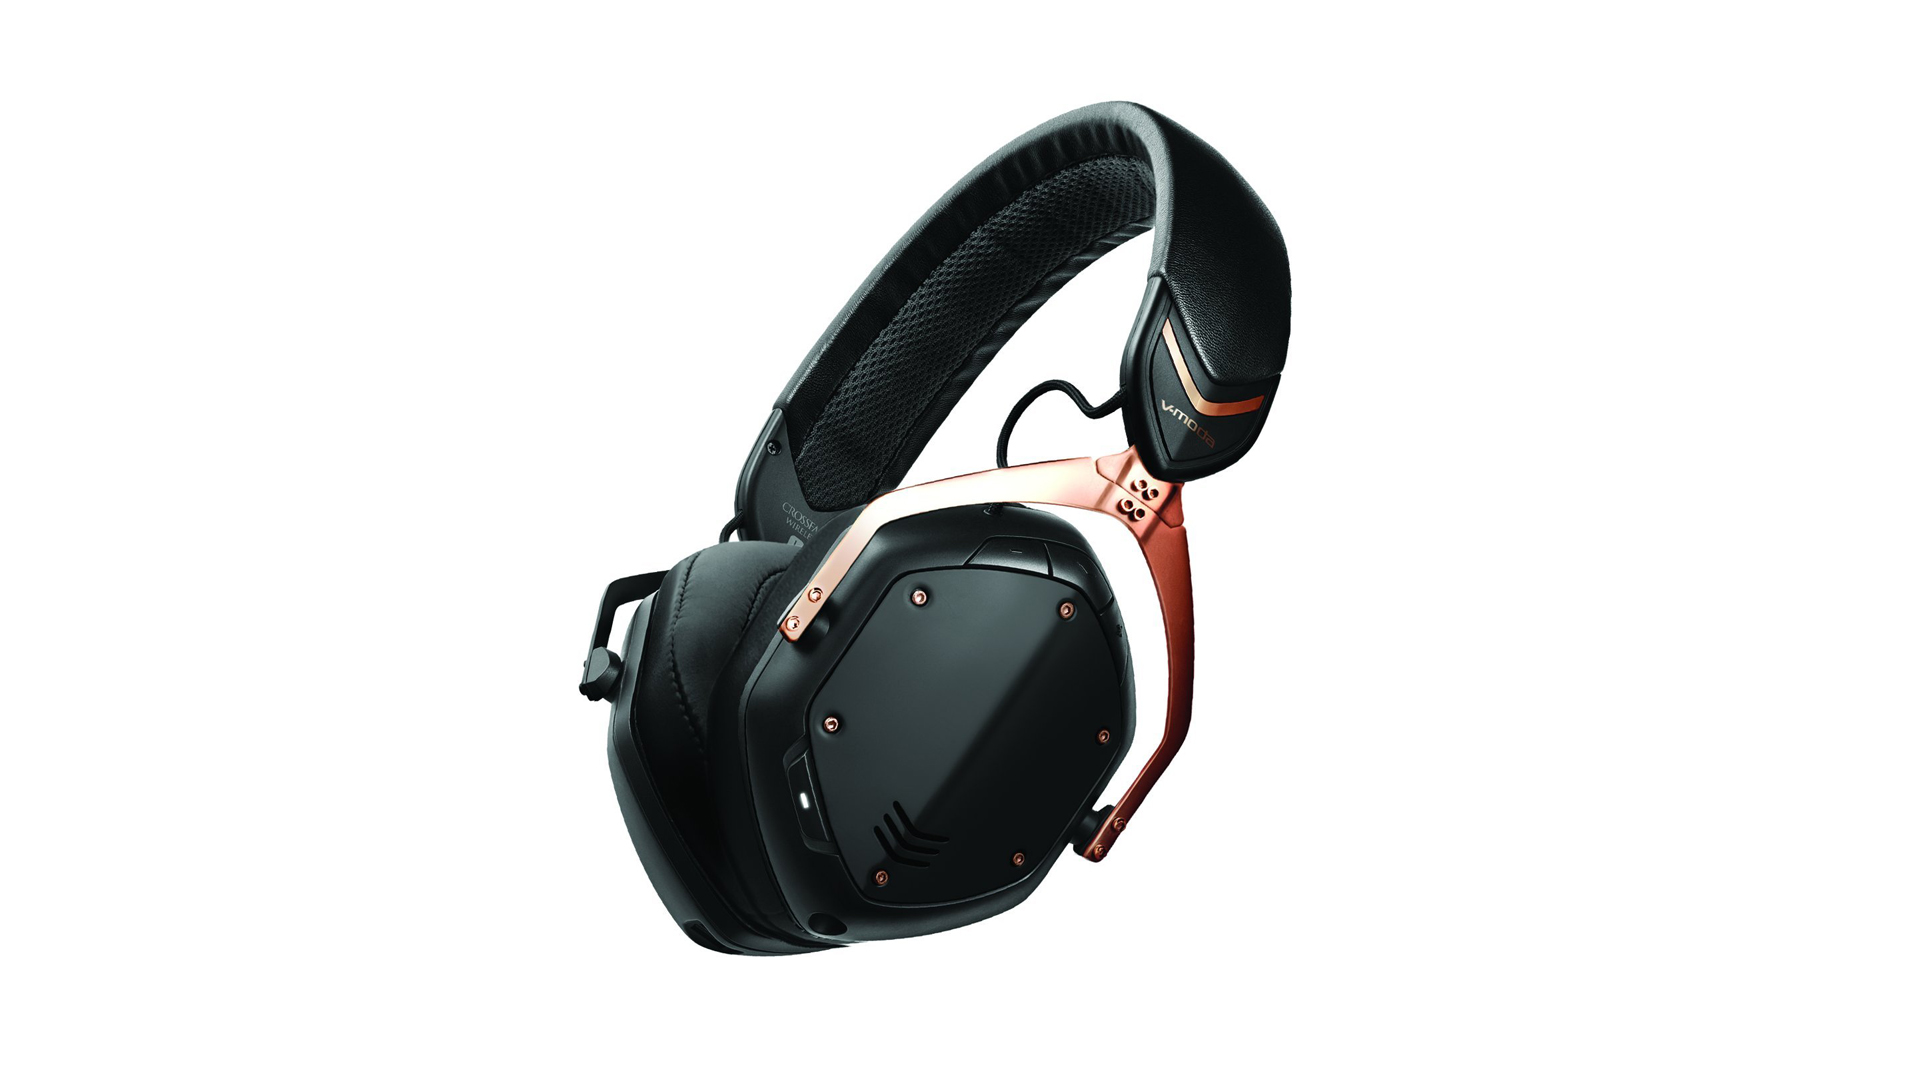 Product image of the V-Moda Crossfade 2 Wireless Codex in black and rose gold.